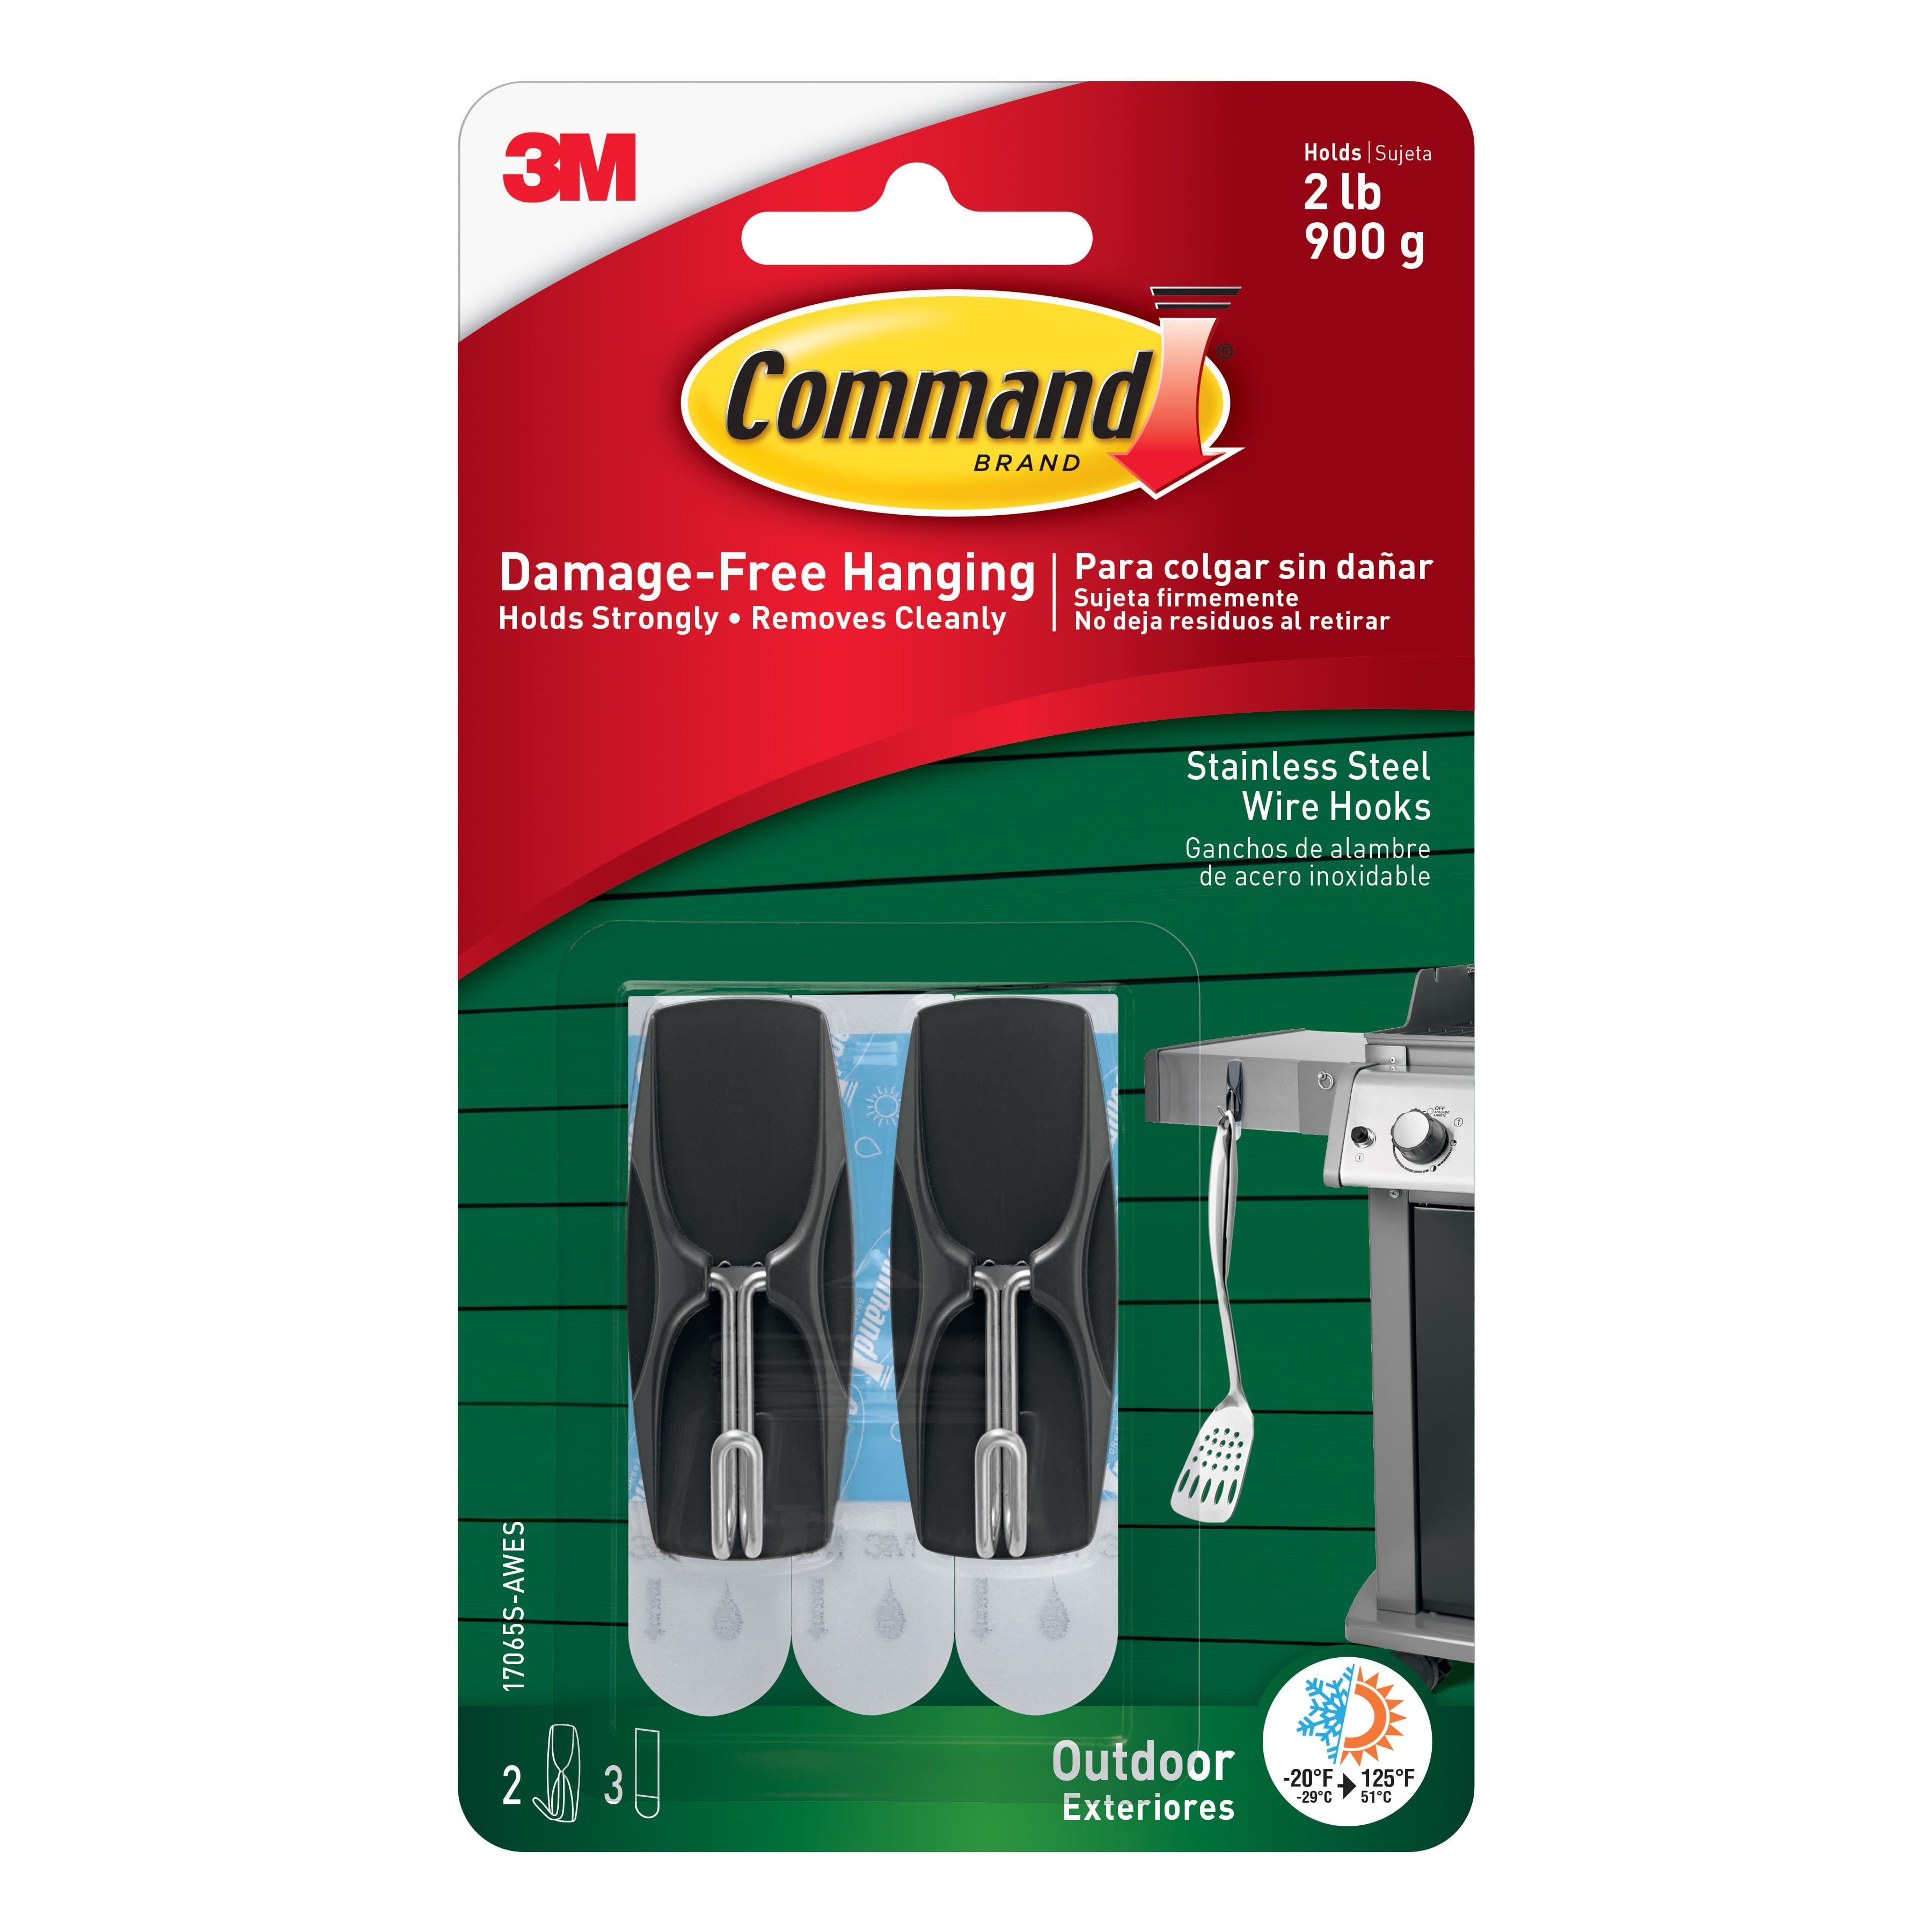 Command™ Small Wire Hooks 17067